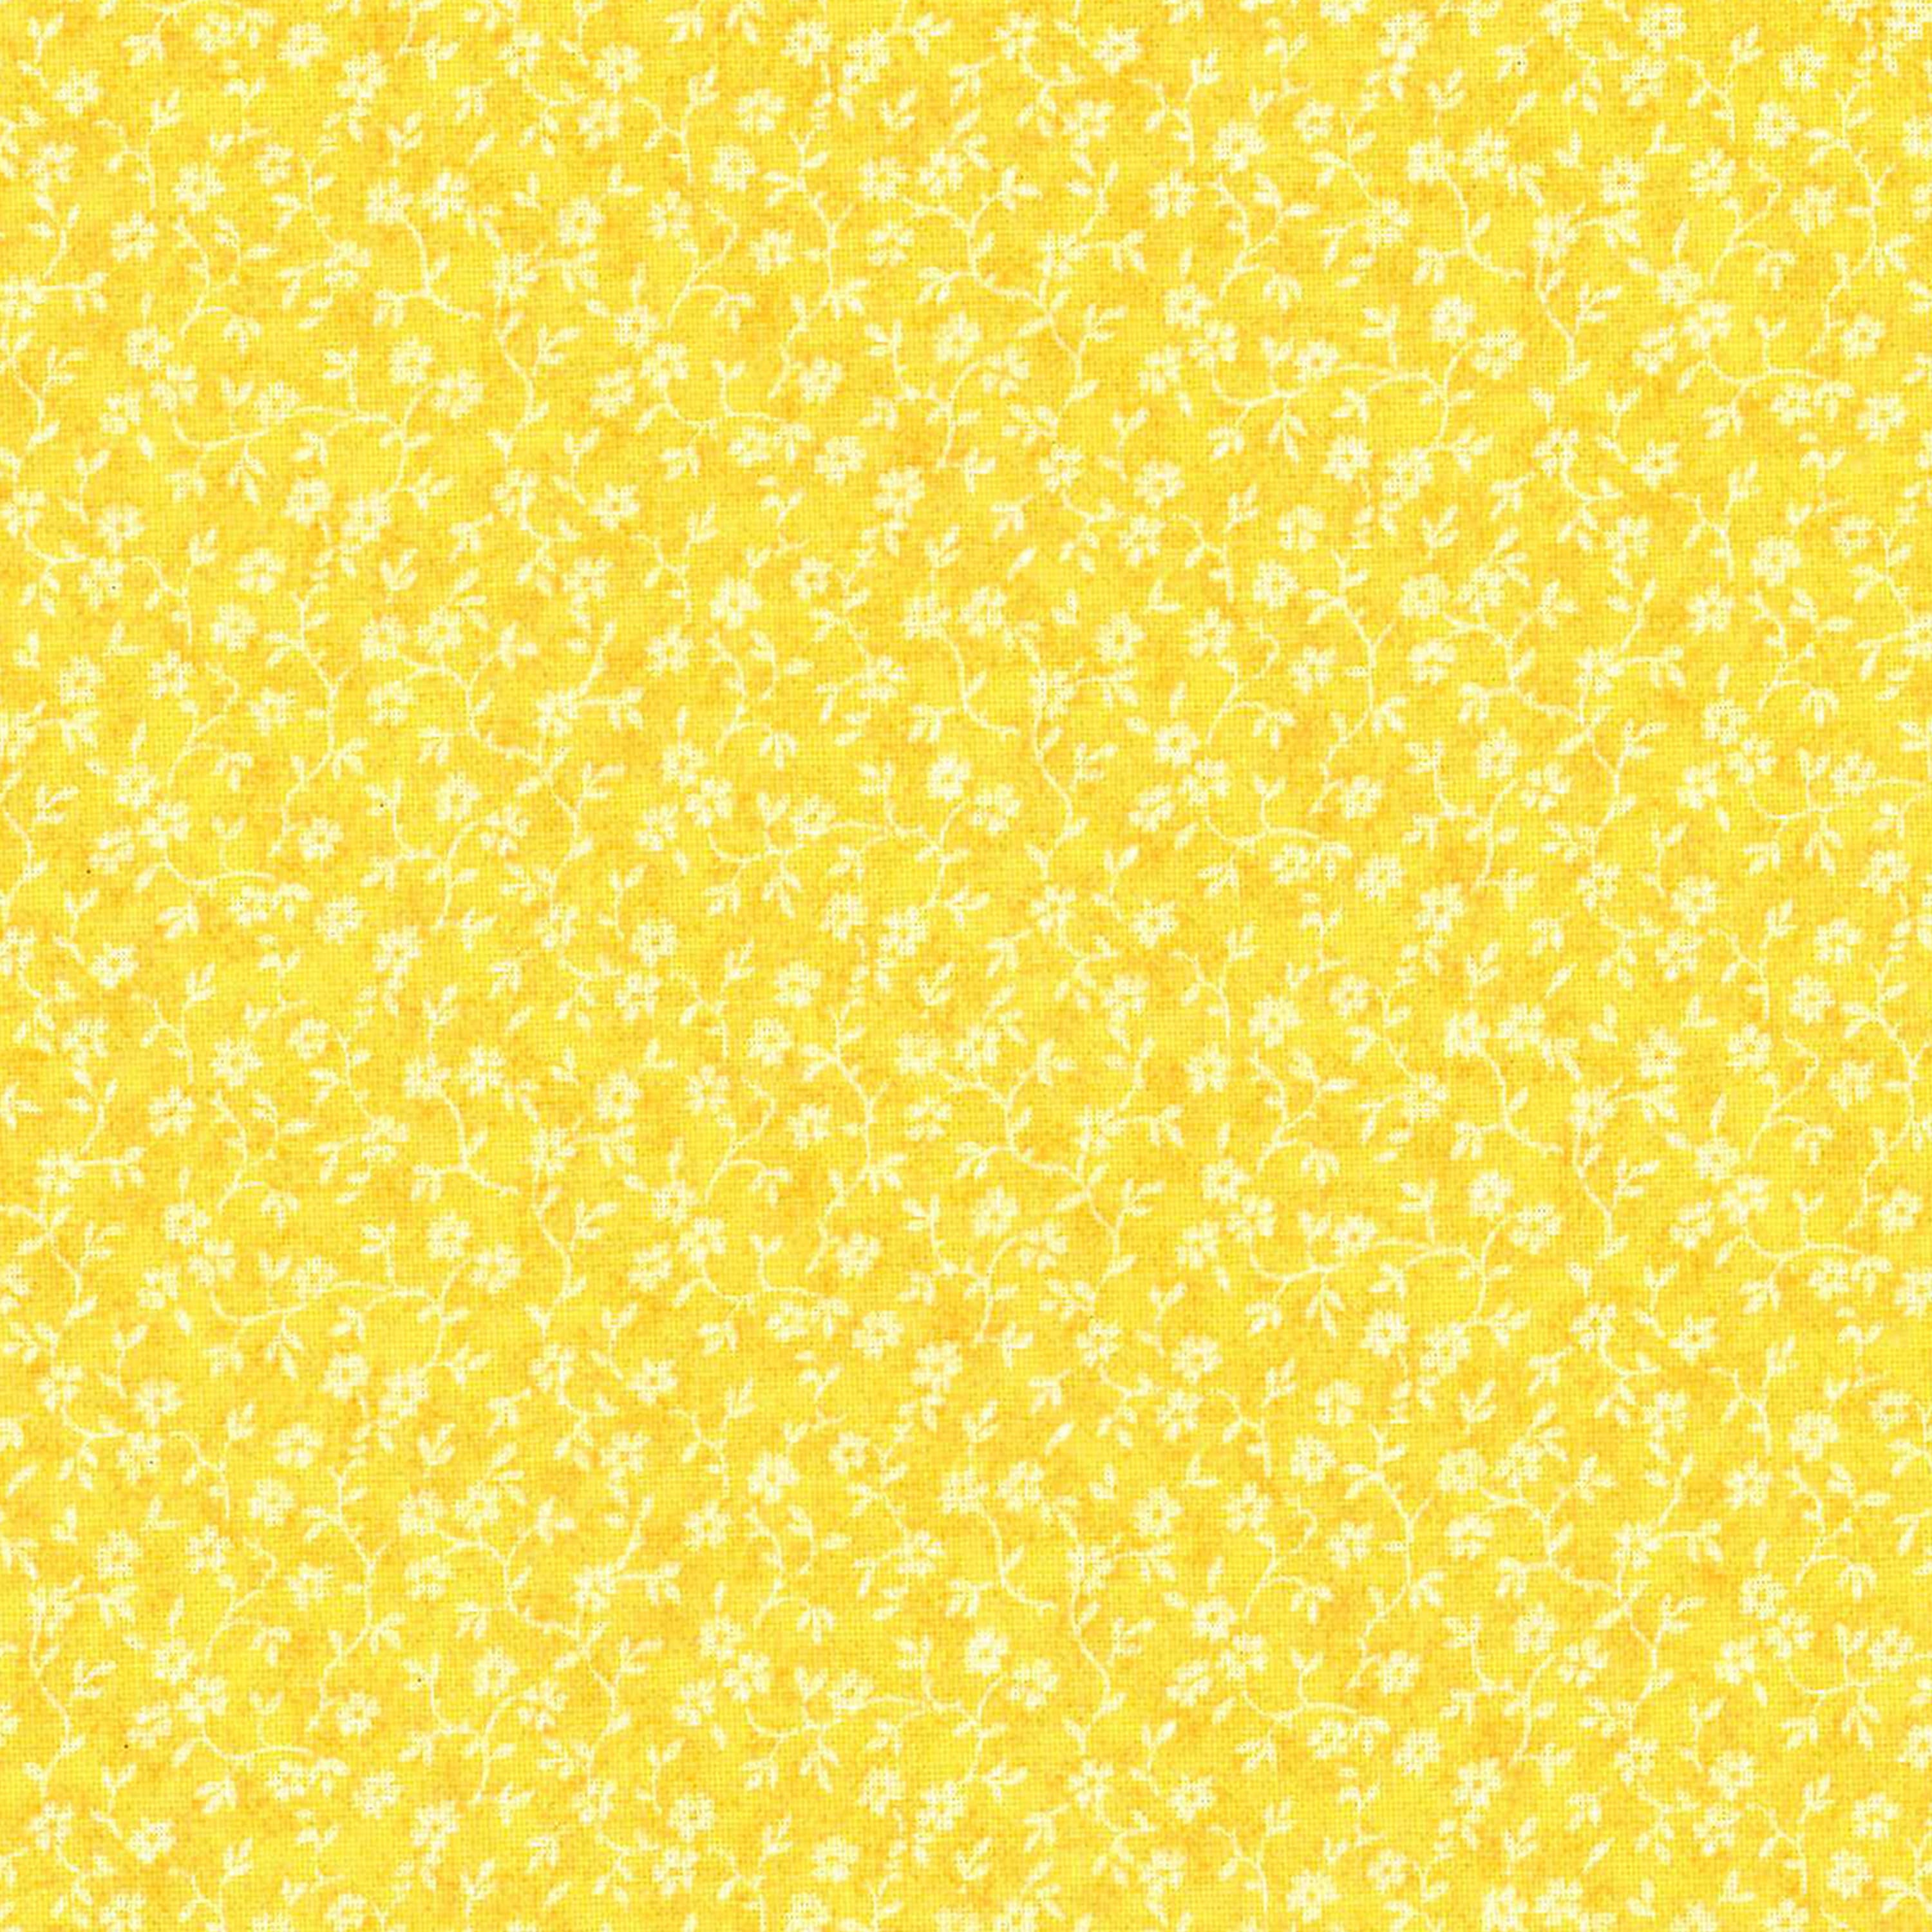 Yellow Illusions Floral Cotton Fabric